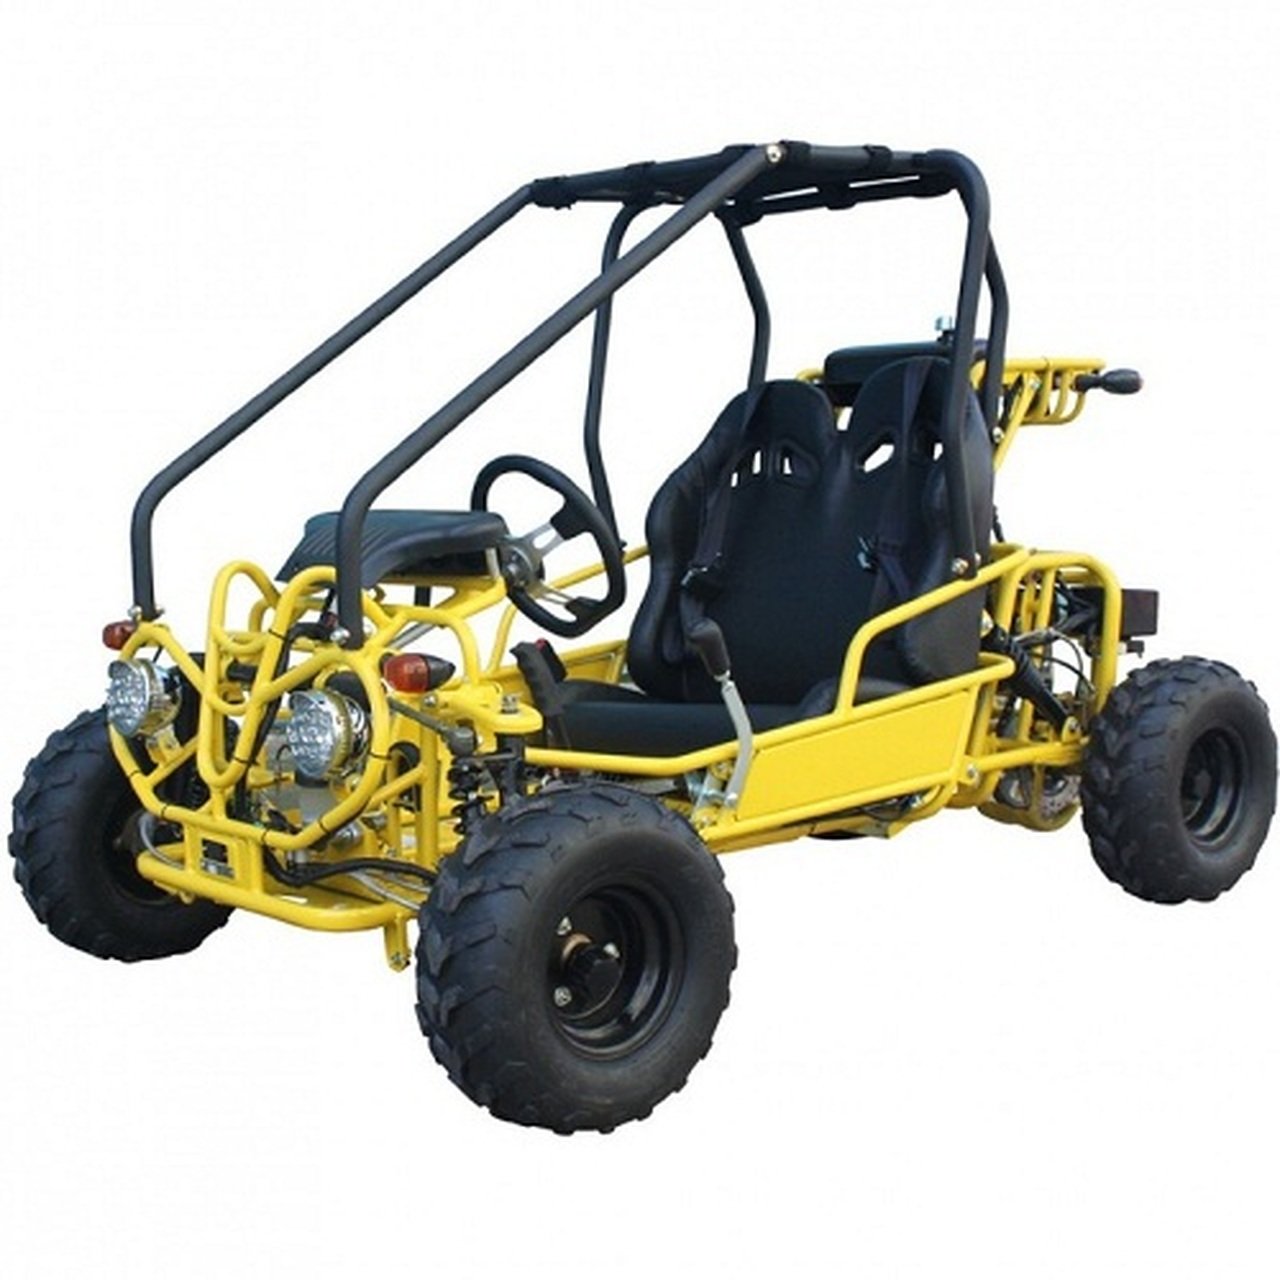 110cc go-kart Automatic with Reverse